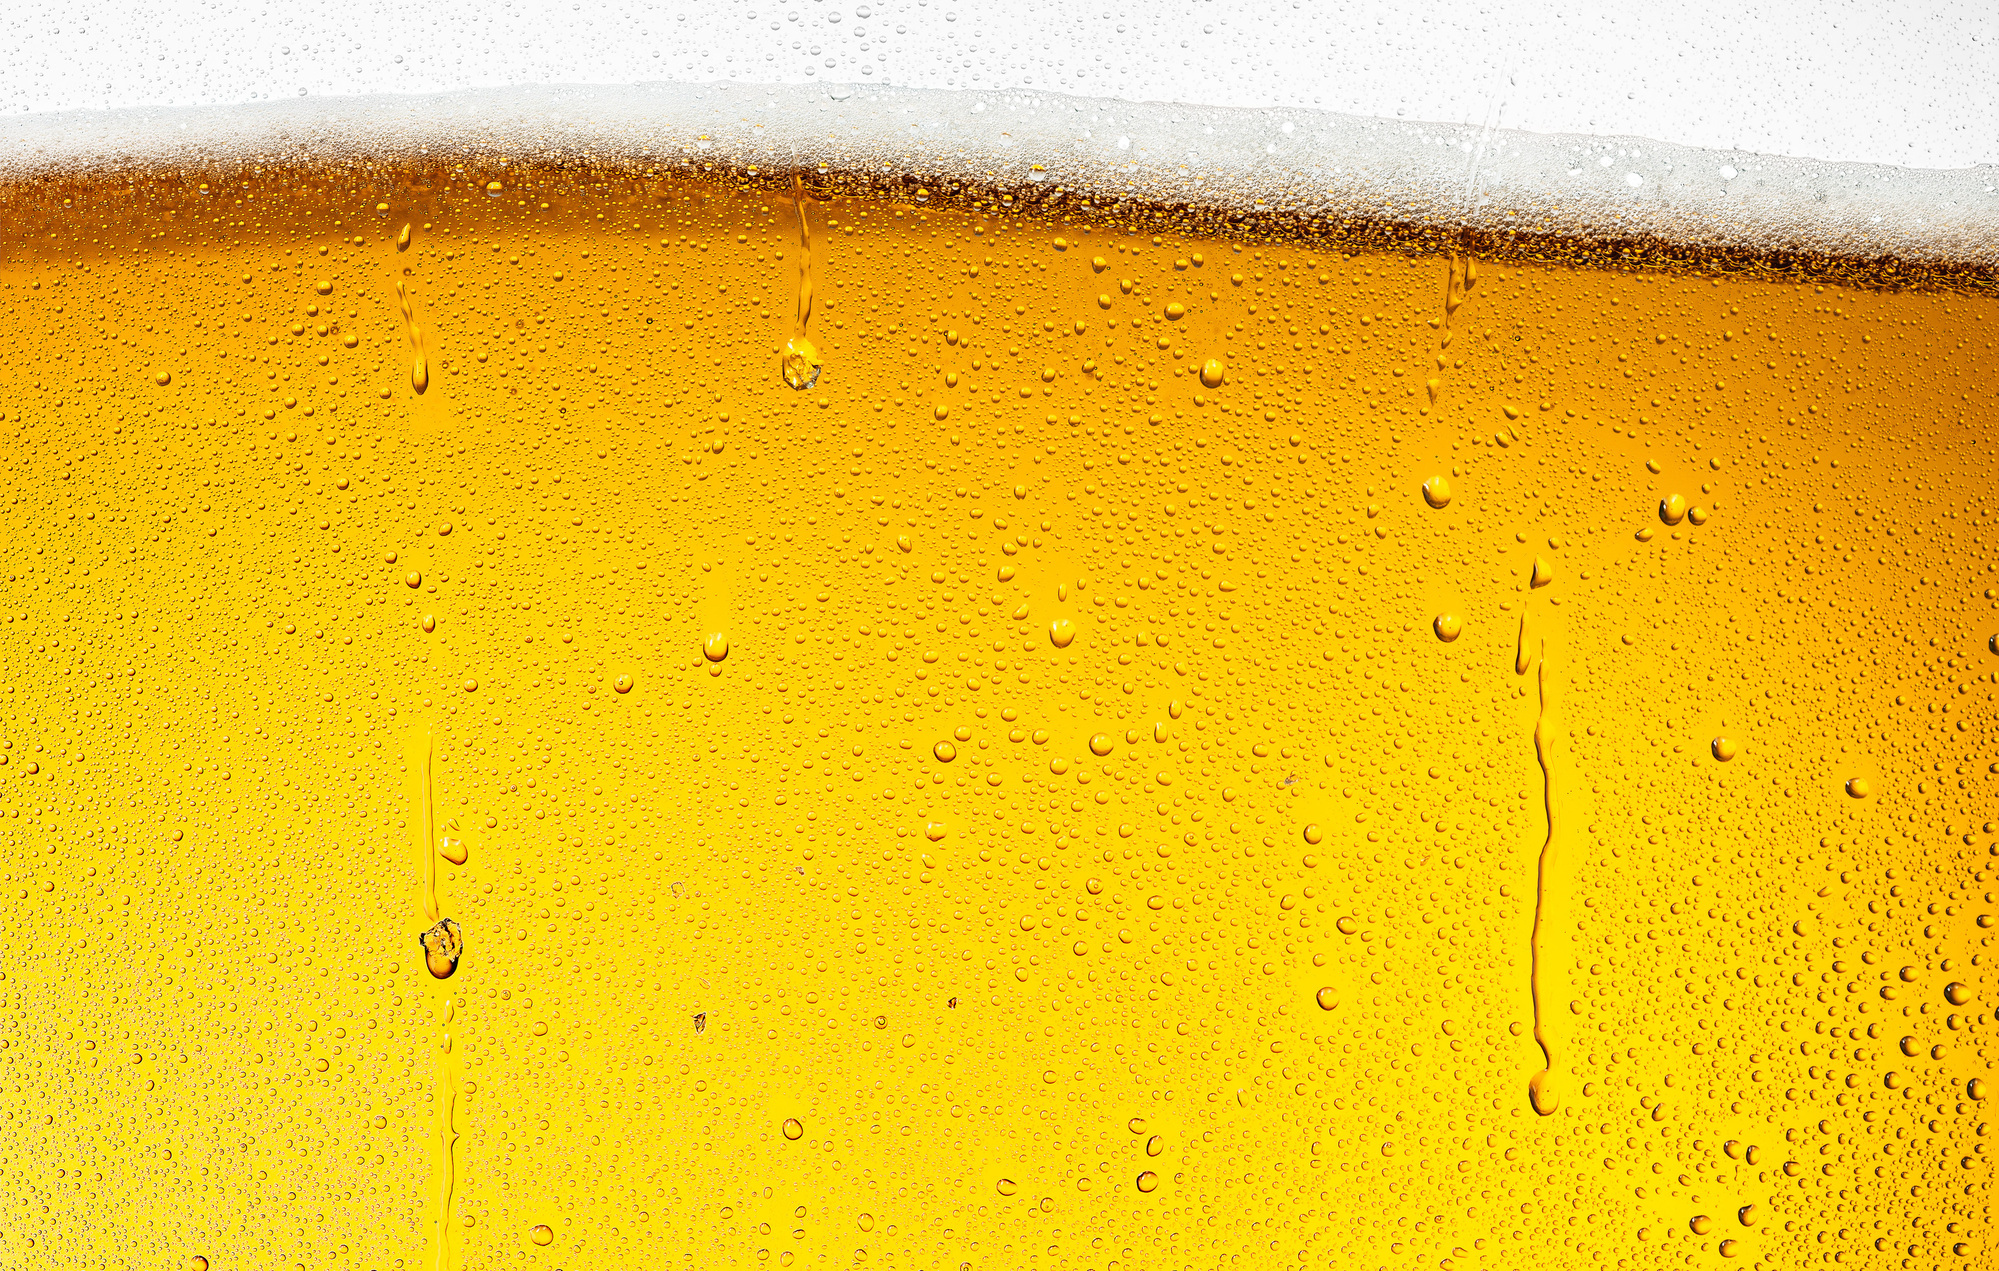 Miller High Life beer pint by beverage product photographer Timothy Hogan